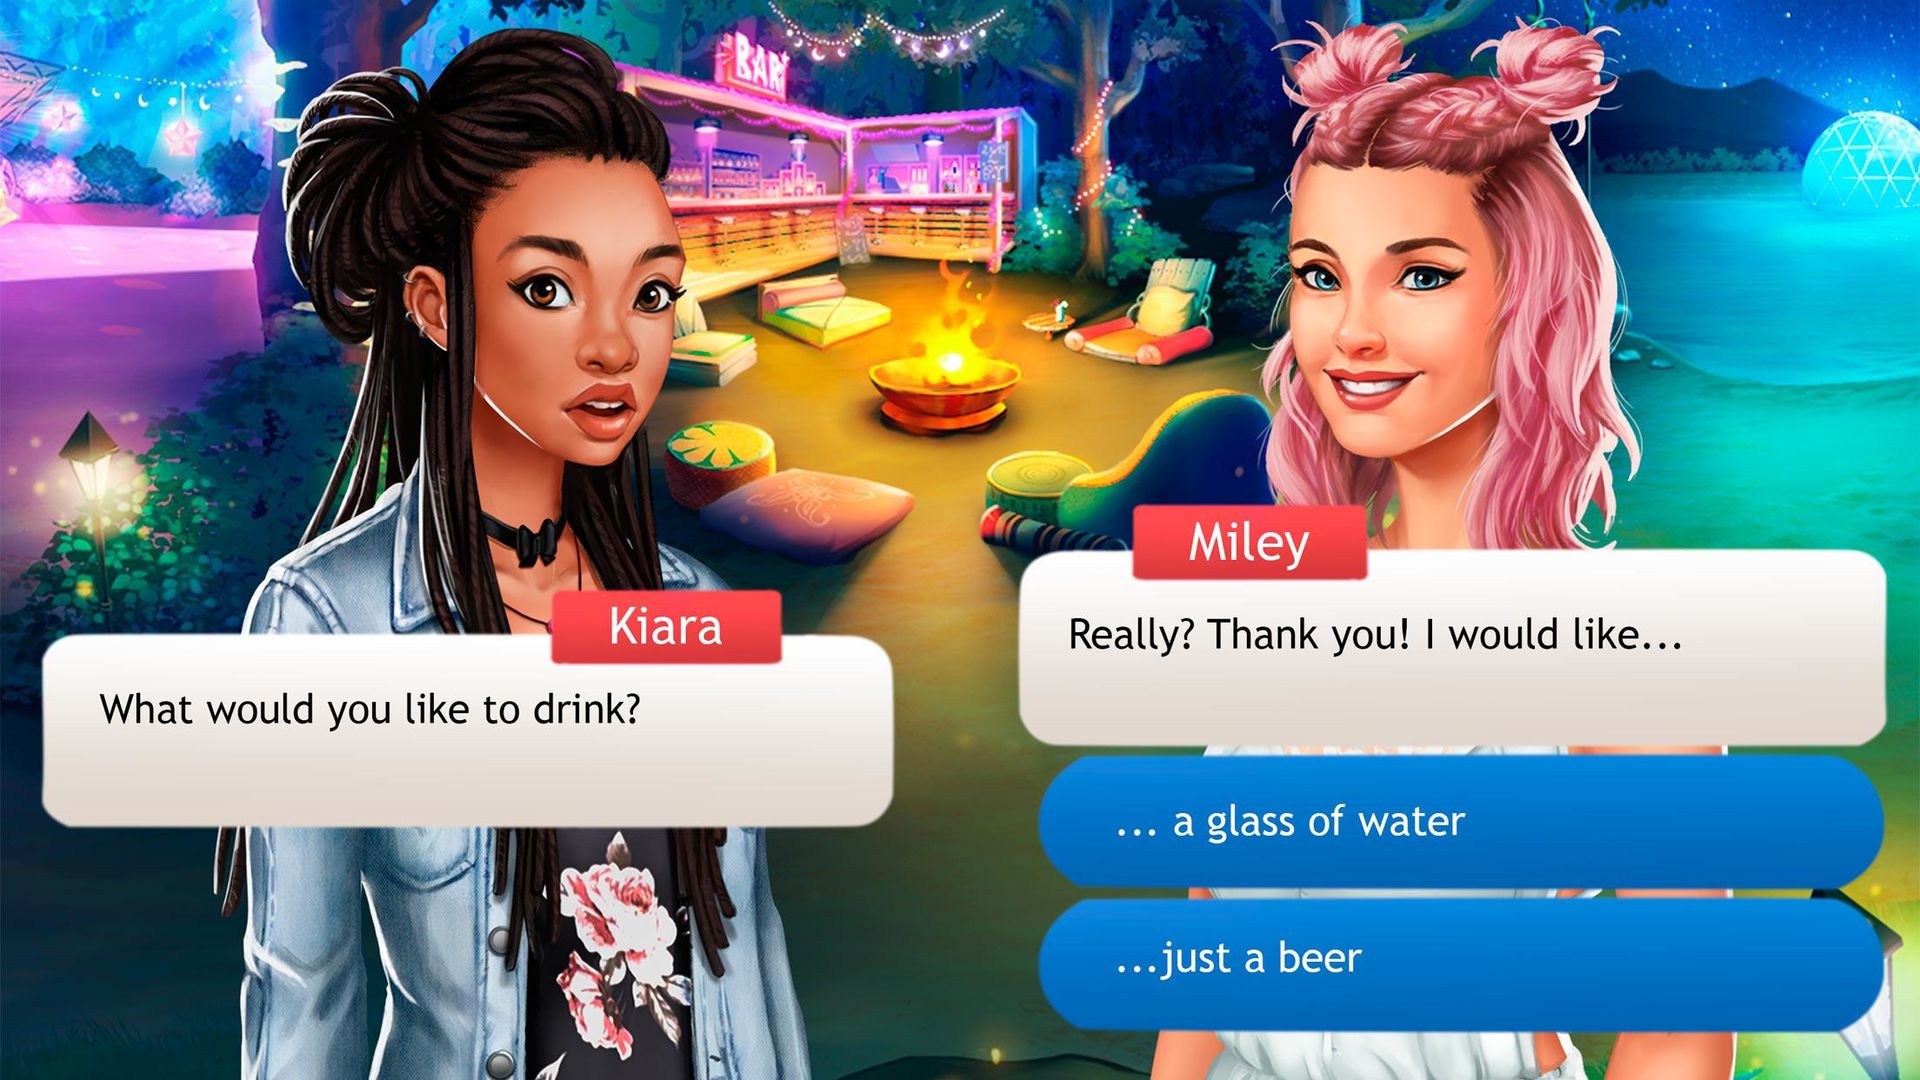 Screenshot of My High School Summer Party - Love Story Episode I